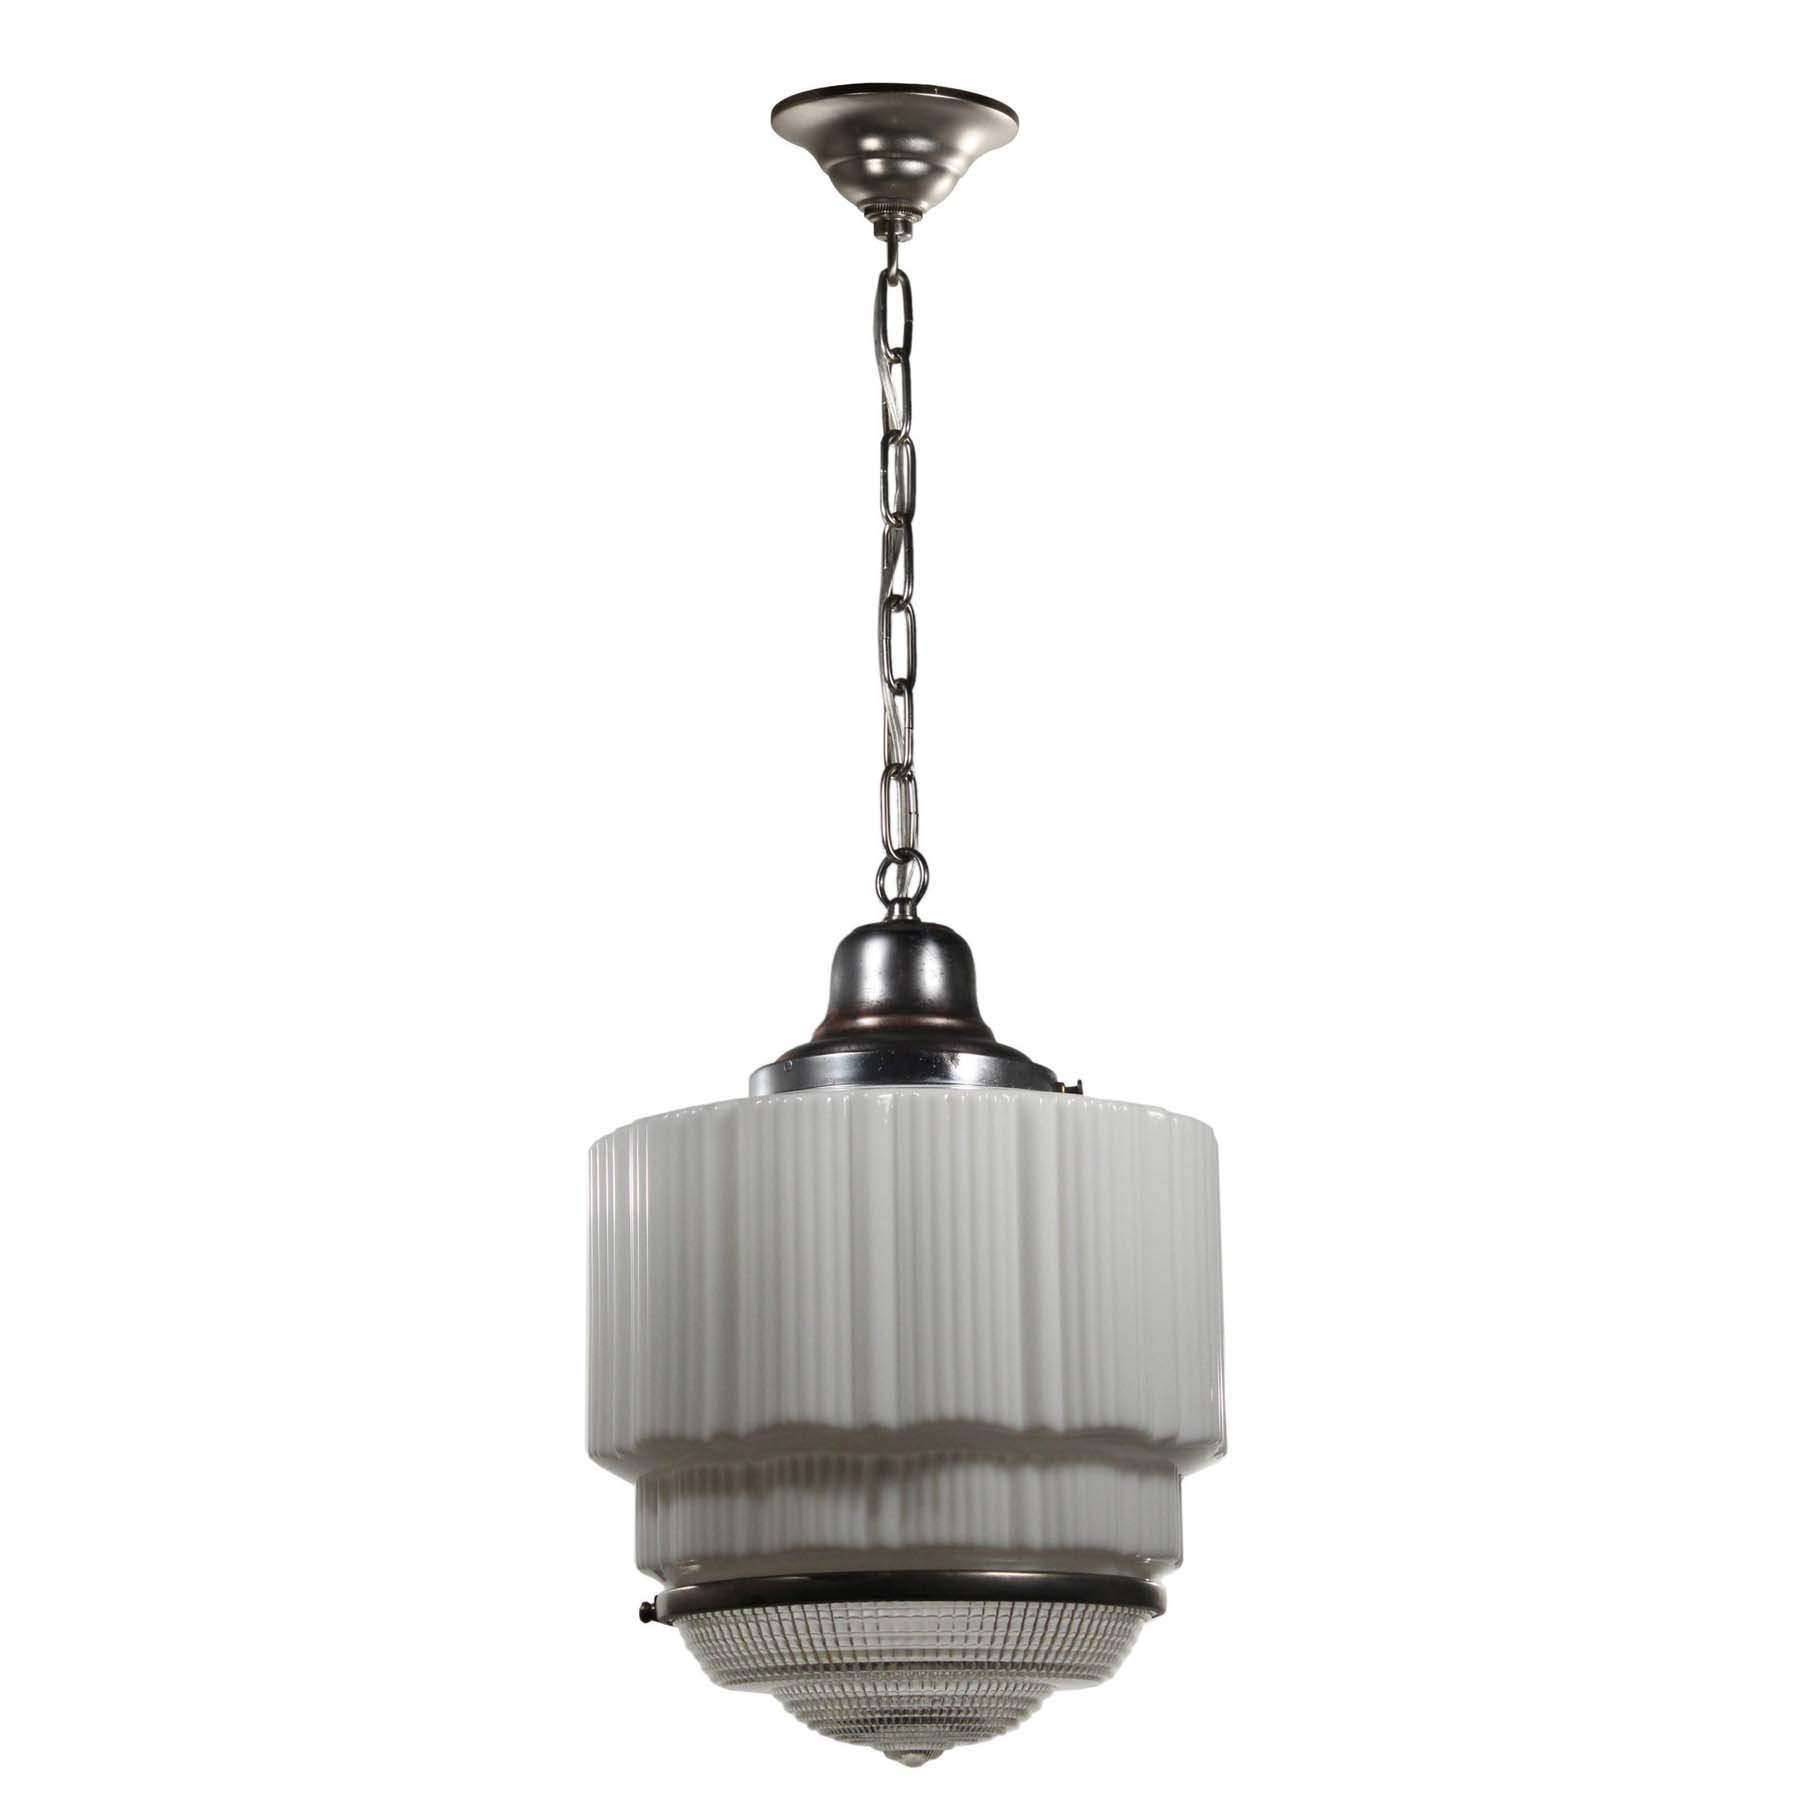 SOLD Large Antique Art Deco Skyscraper Pendant Light with Two-Part Prismatic Shade-69959